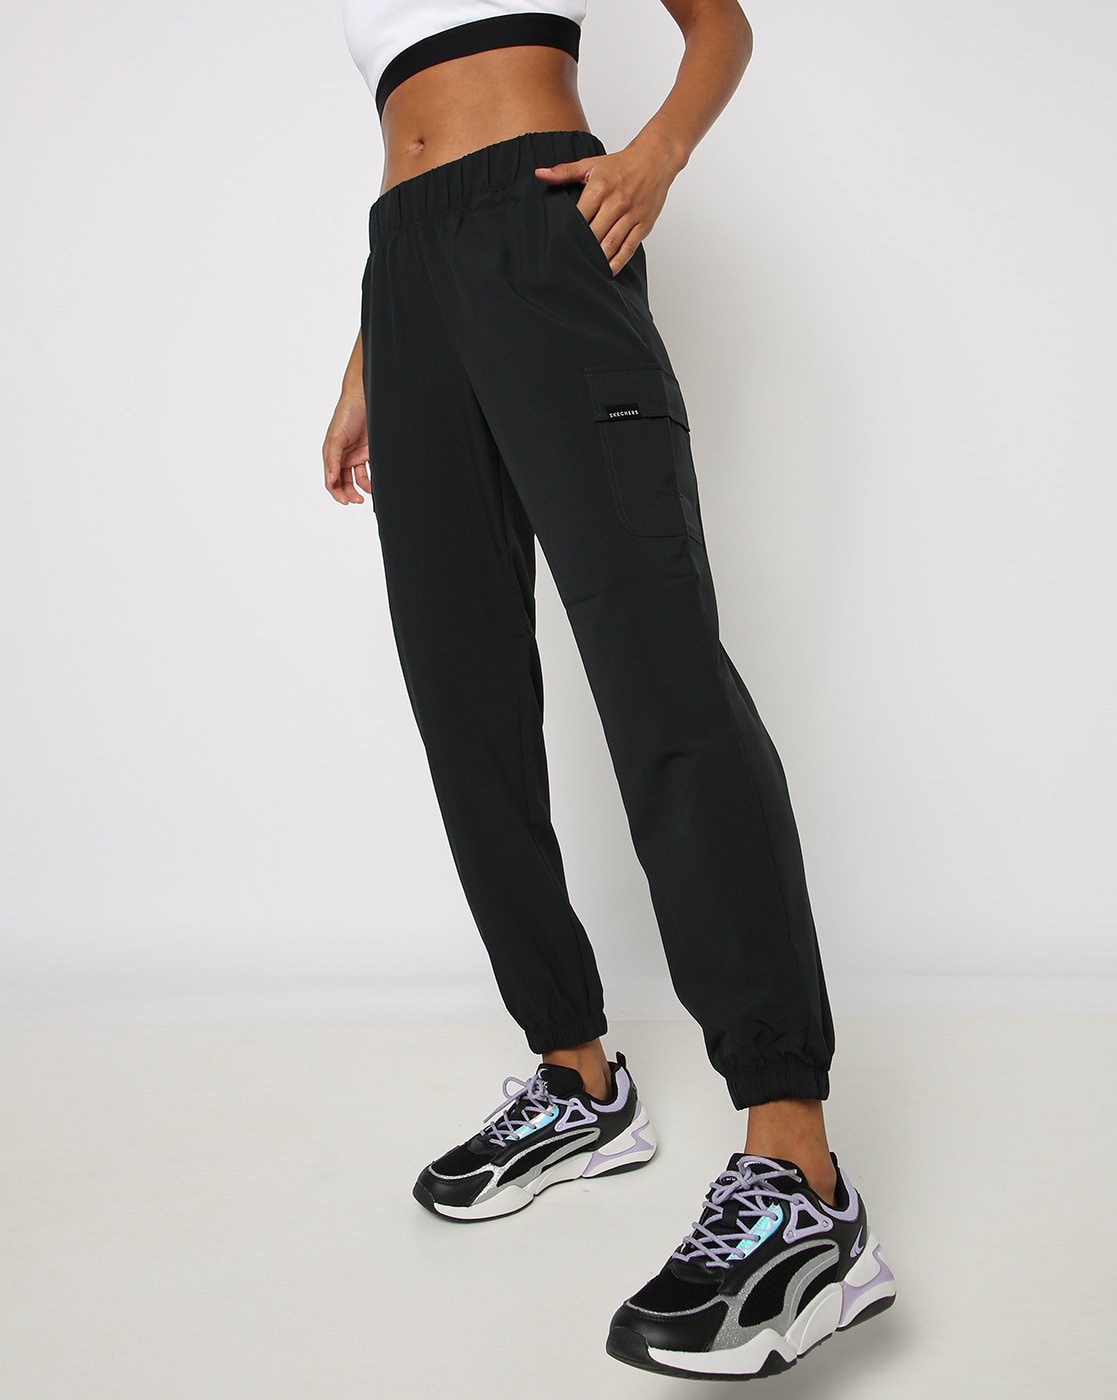 SKECHERS Joggers  Buy SKECHERS Expedition Jogger Online  Nykaa Fashion